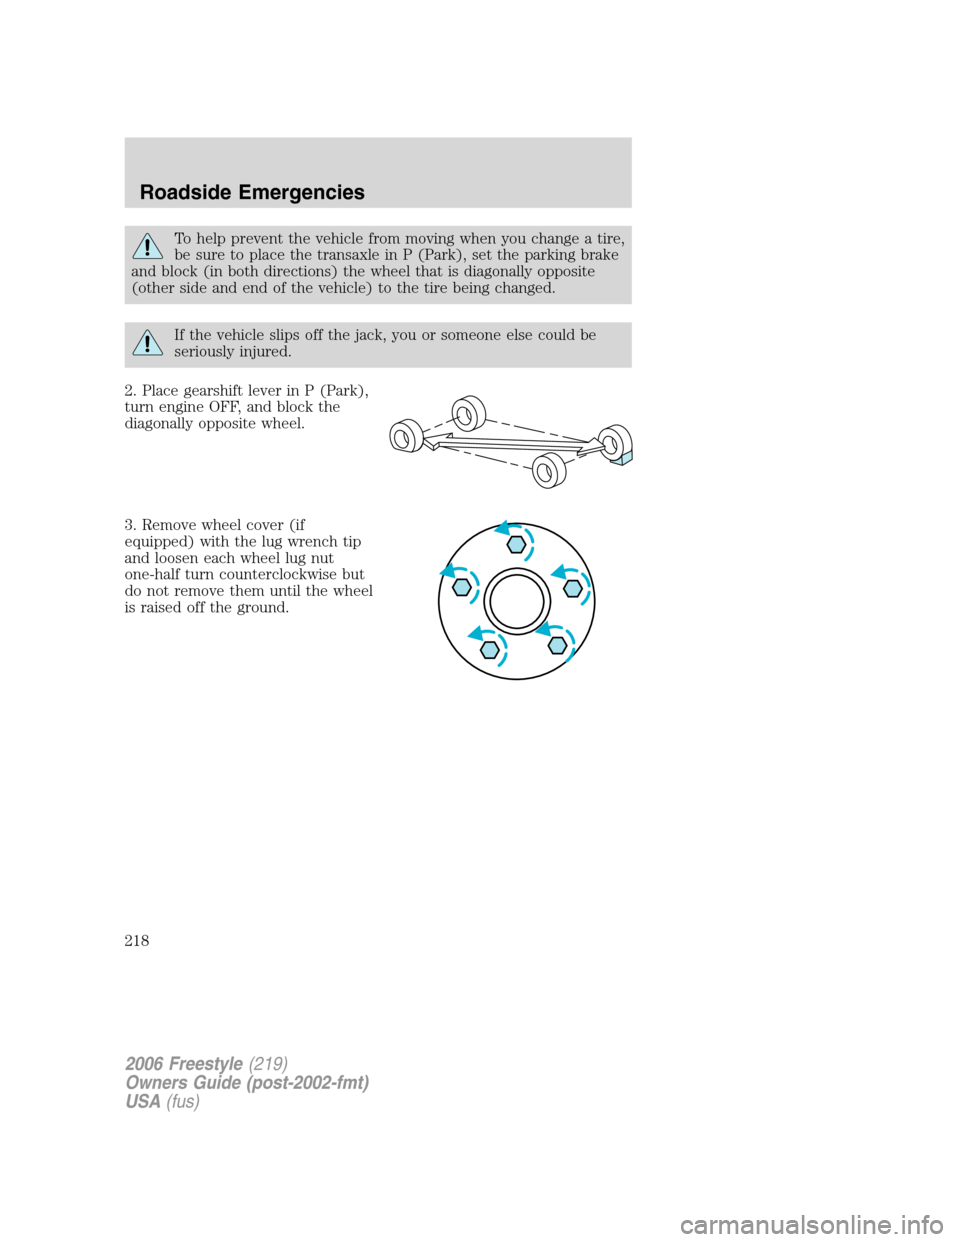 FORD FREESTYLE 2006 1.G Owners Manual To help prevent the vehicle from moving when you change a tire,
be sure to place the transaxle in P (Park), set the parking brake
and block (in both directions) the wheel that is diagonally opposite
(